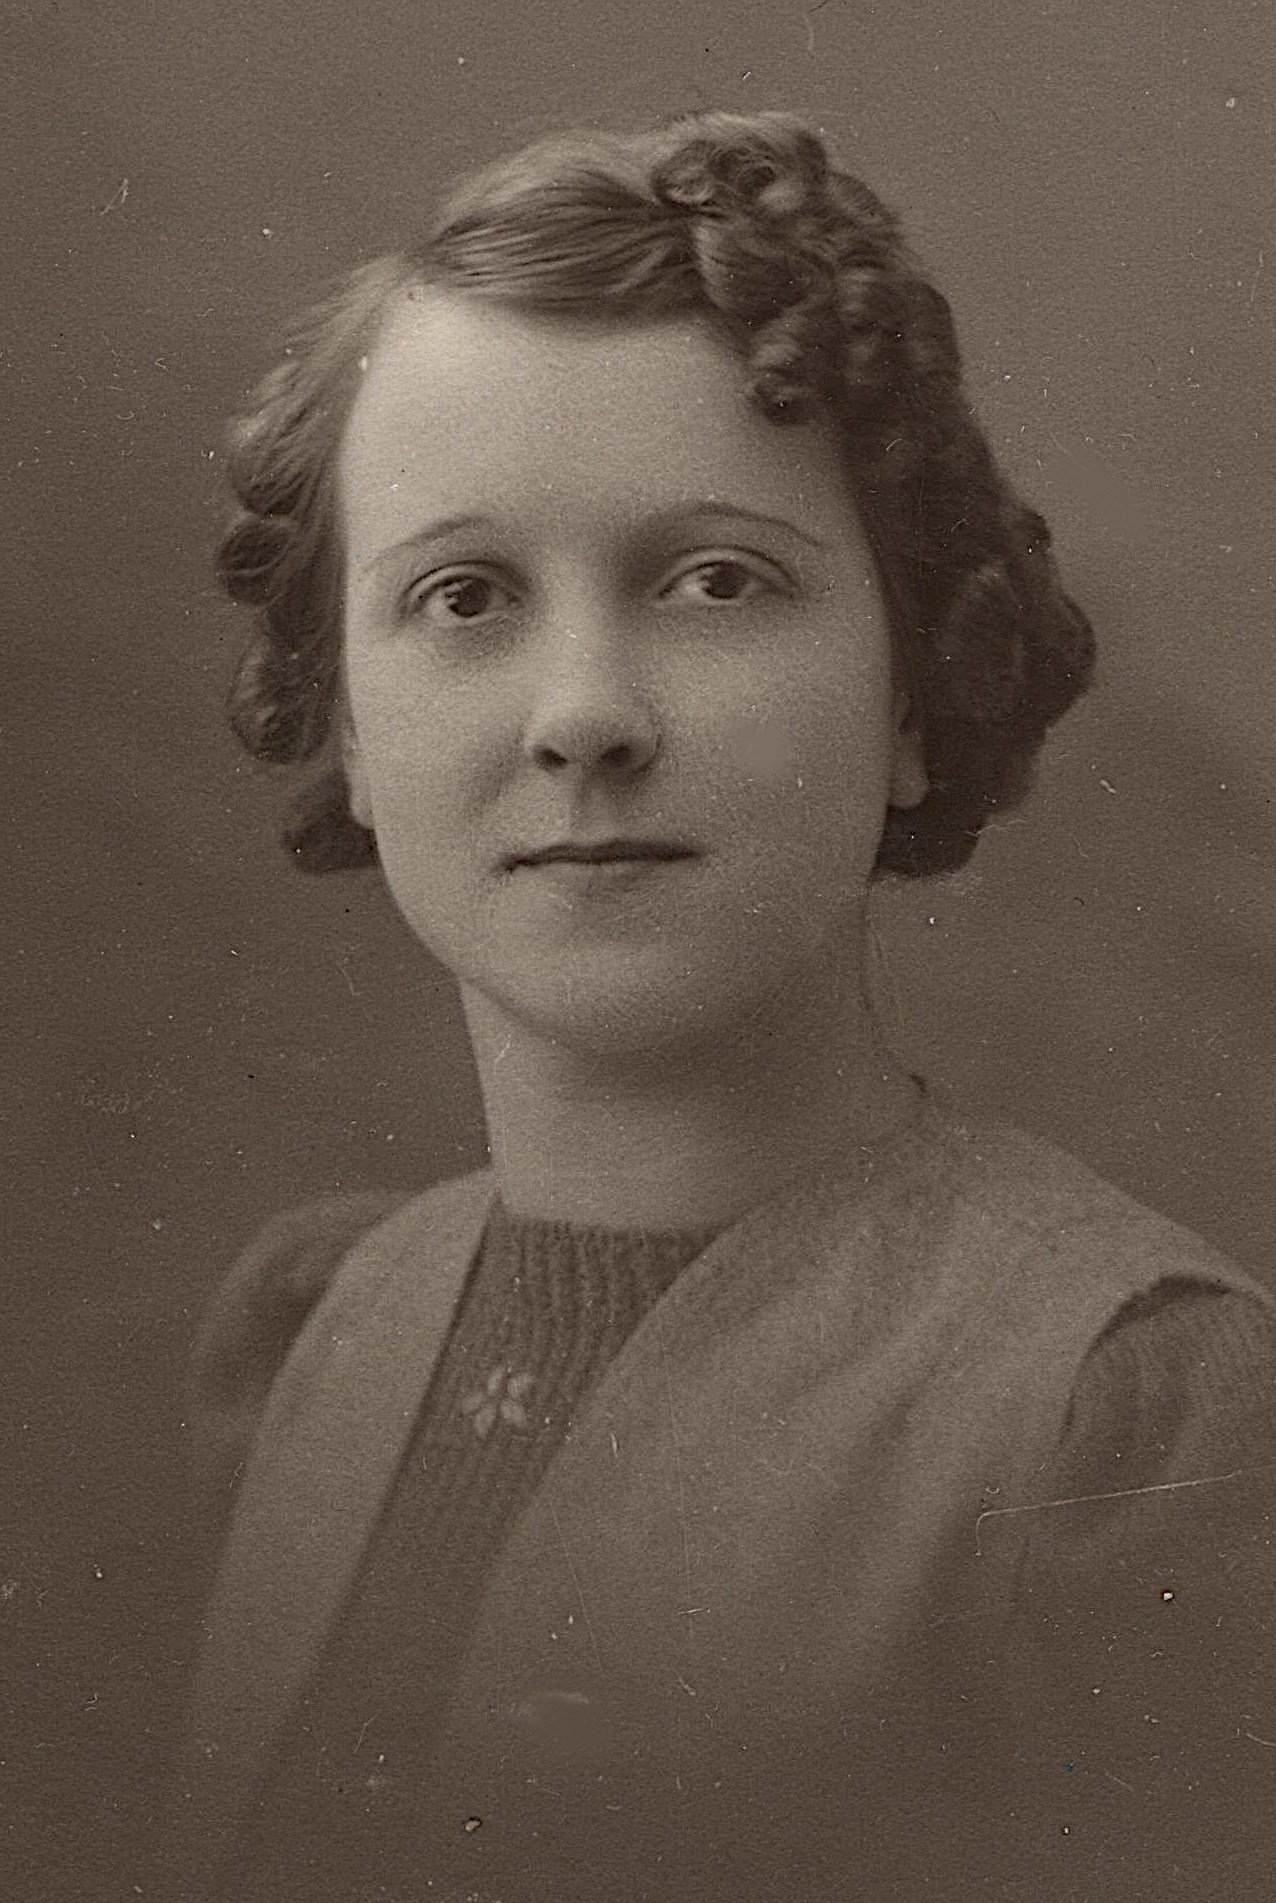 Tribute to Nora Messenger, 1920 - 2020